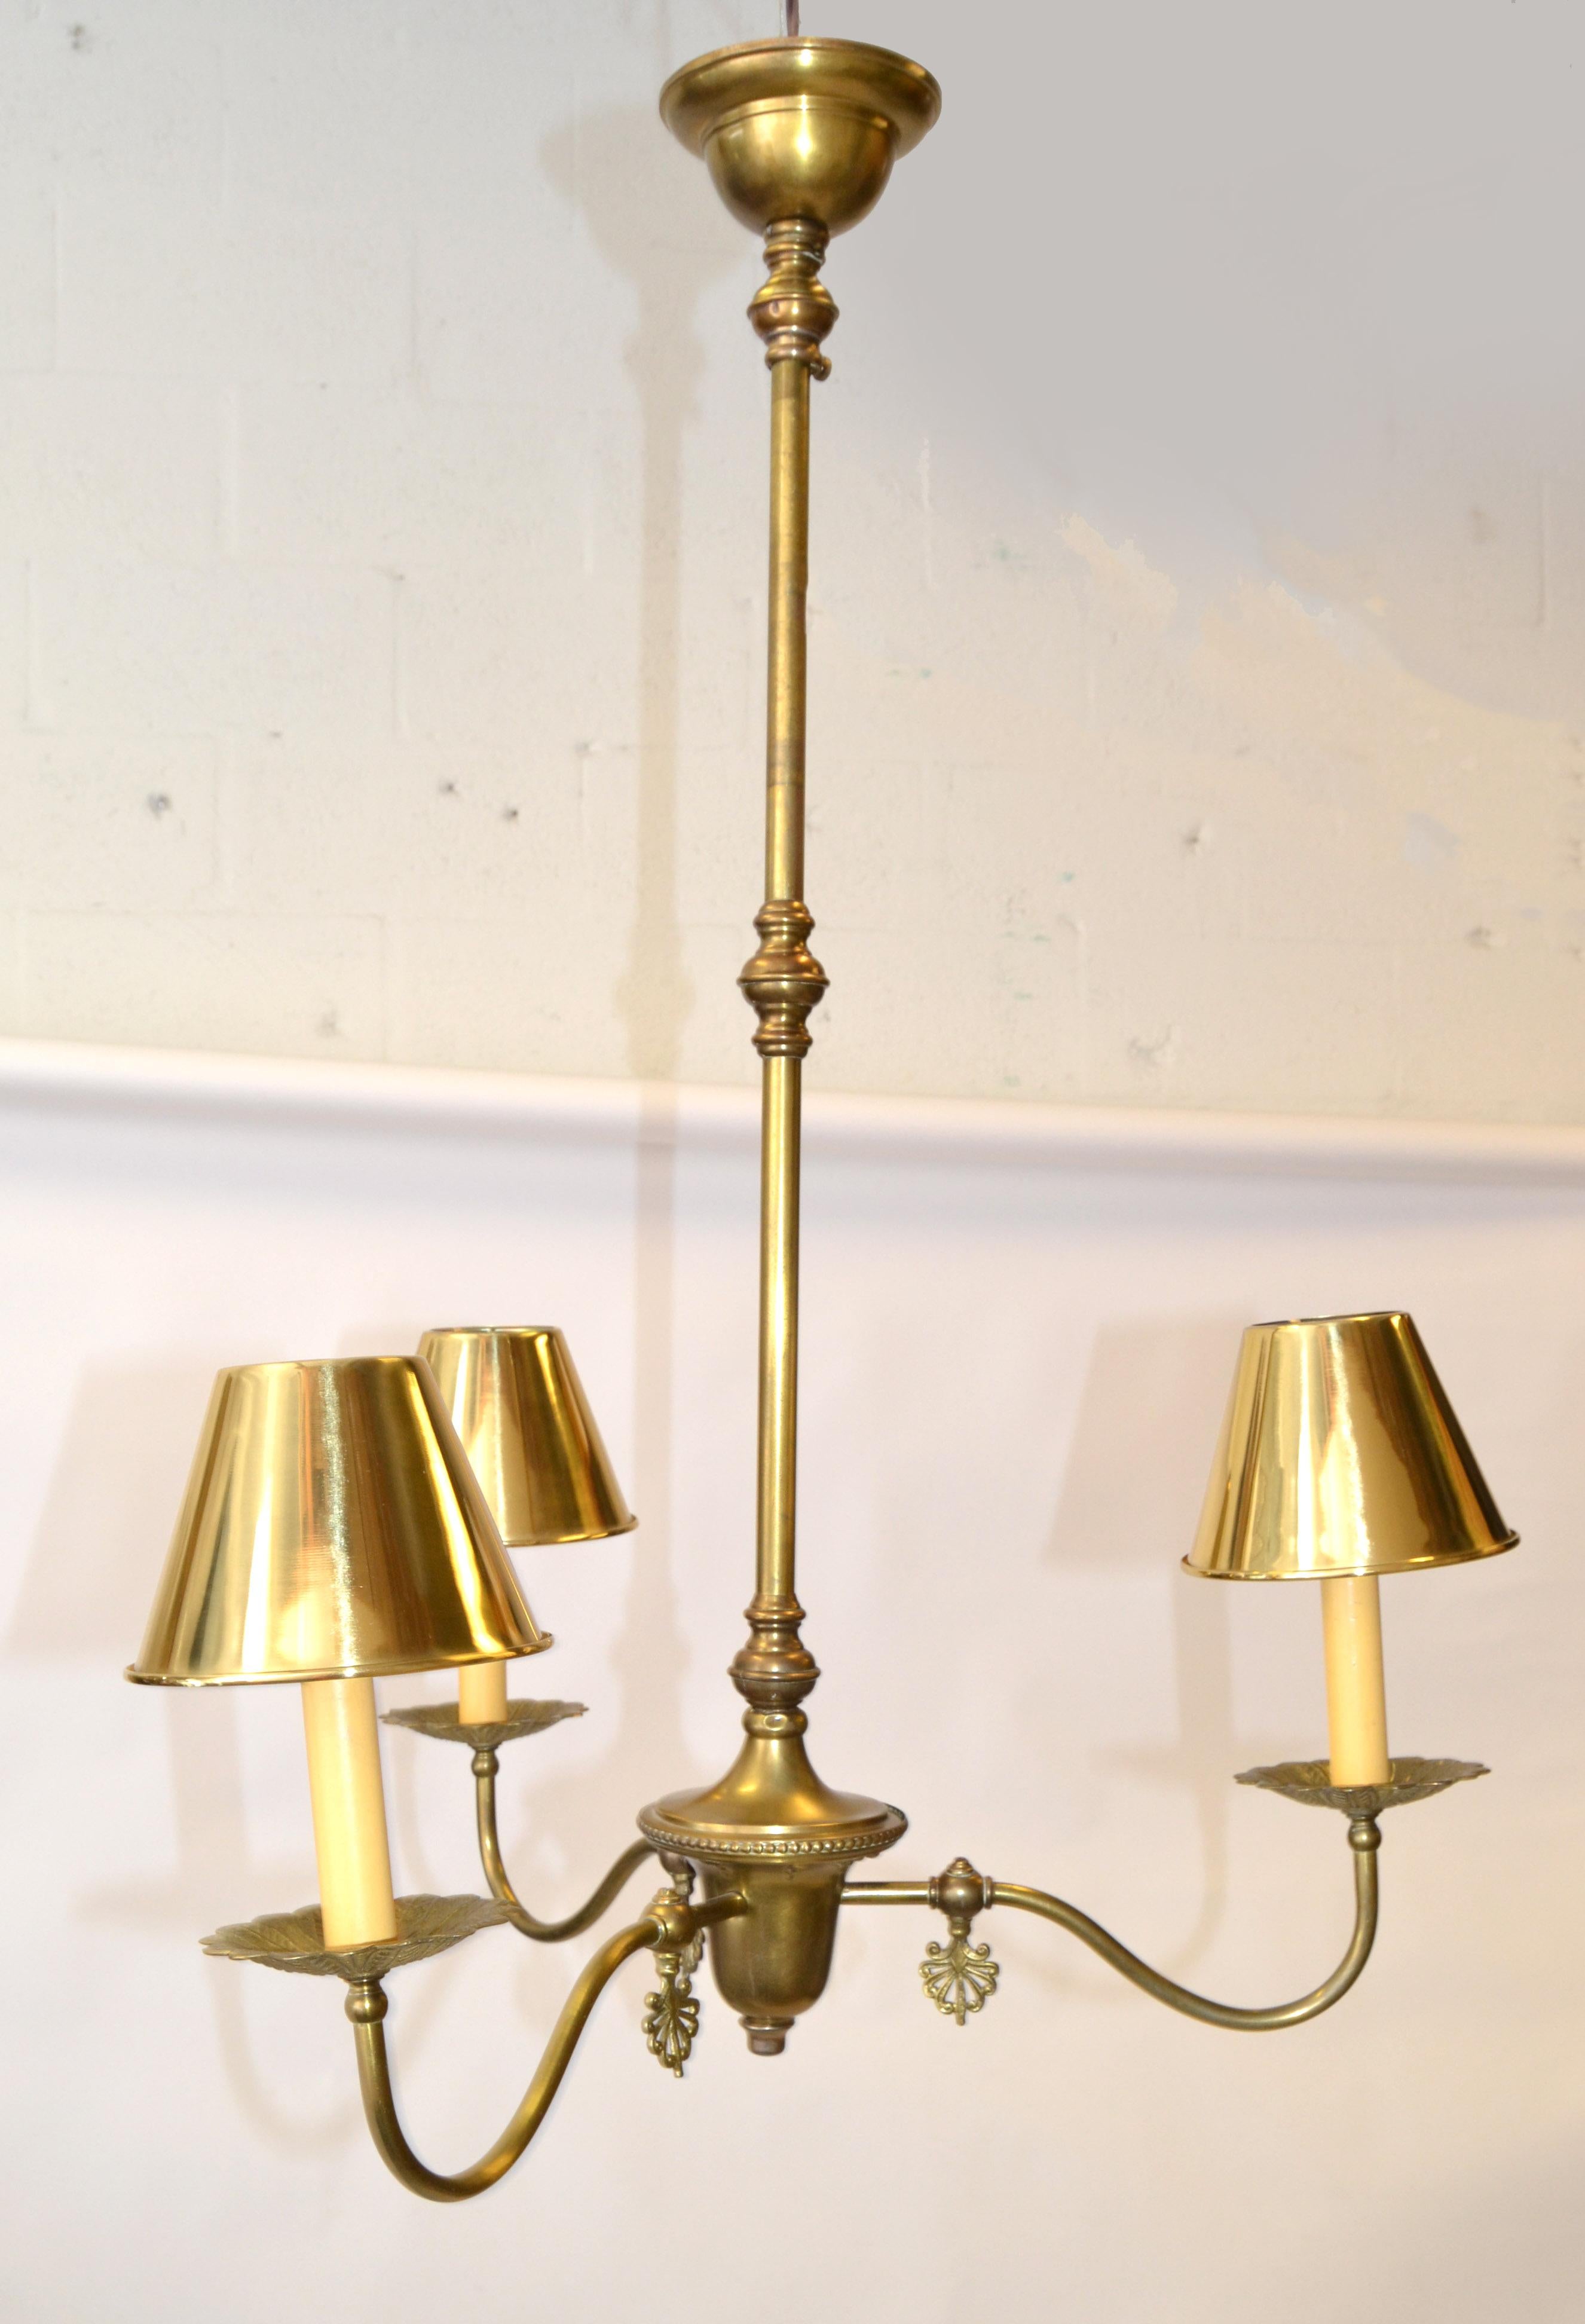 French Neoclassical 3 Arm Pendant Light Chandelier with Brass Clip-On Shades 50s In Good Condition For Sale In Miami, FL